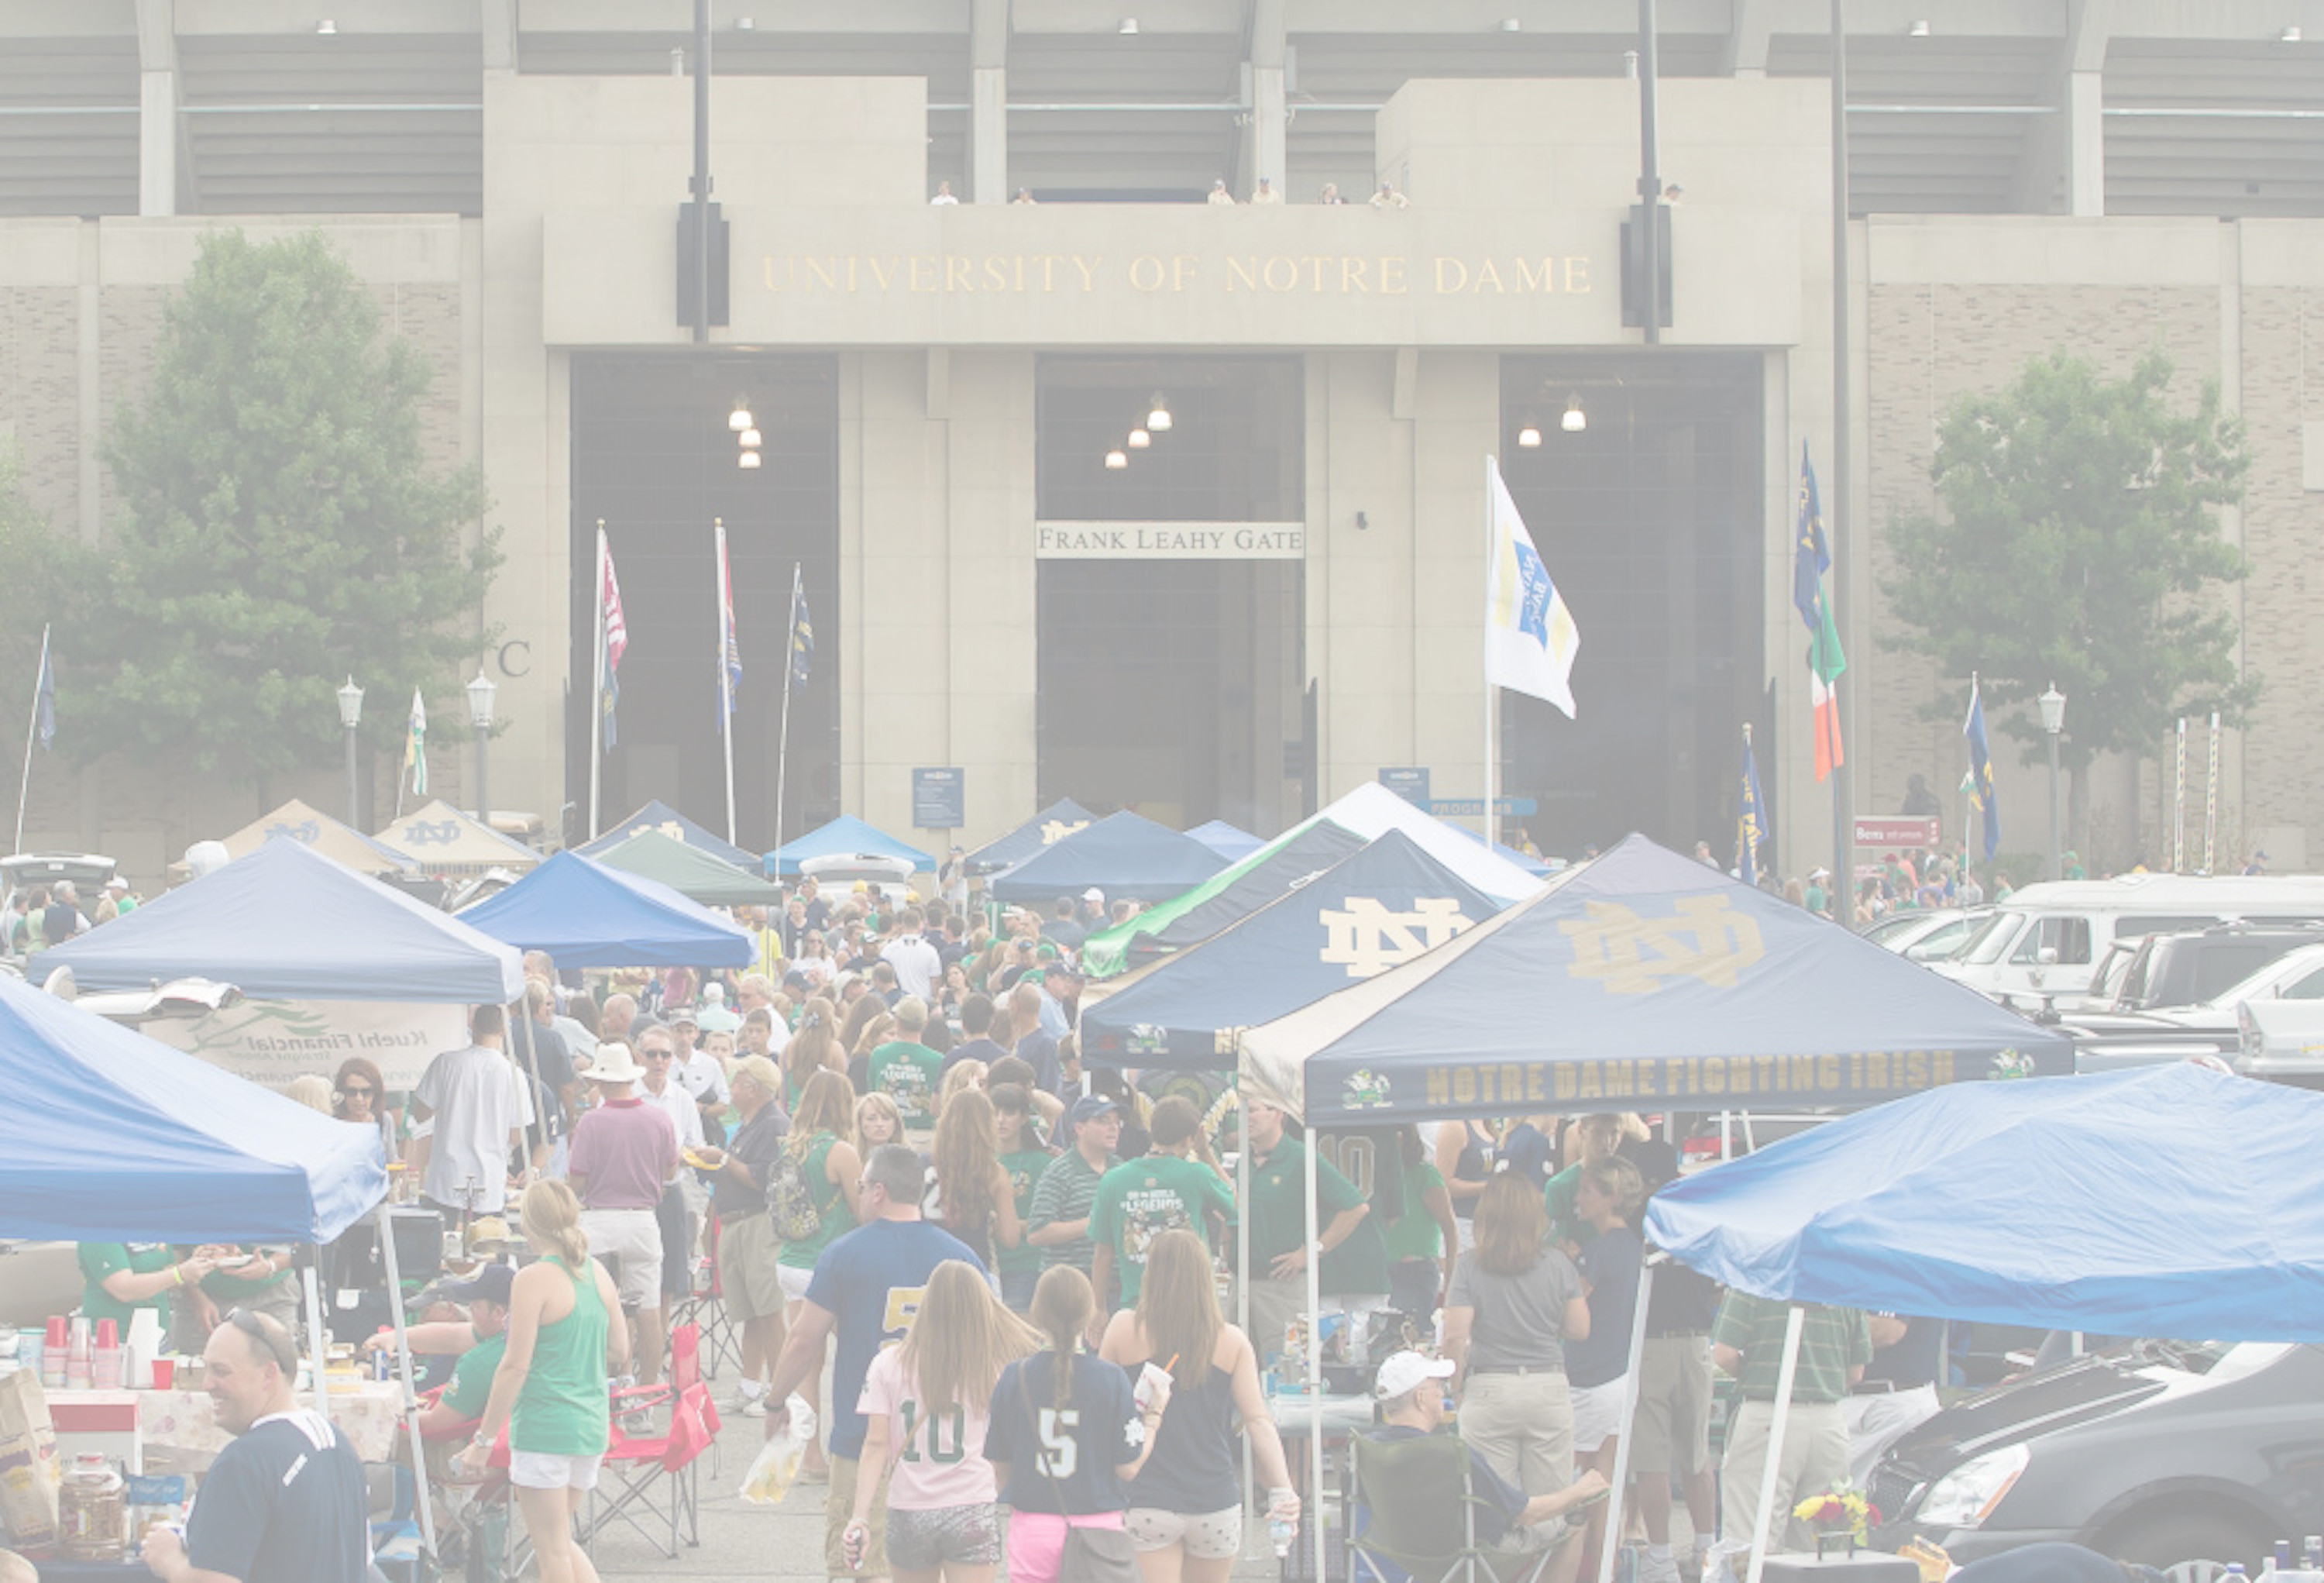 Notre Dame Tailgate